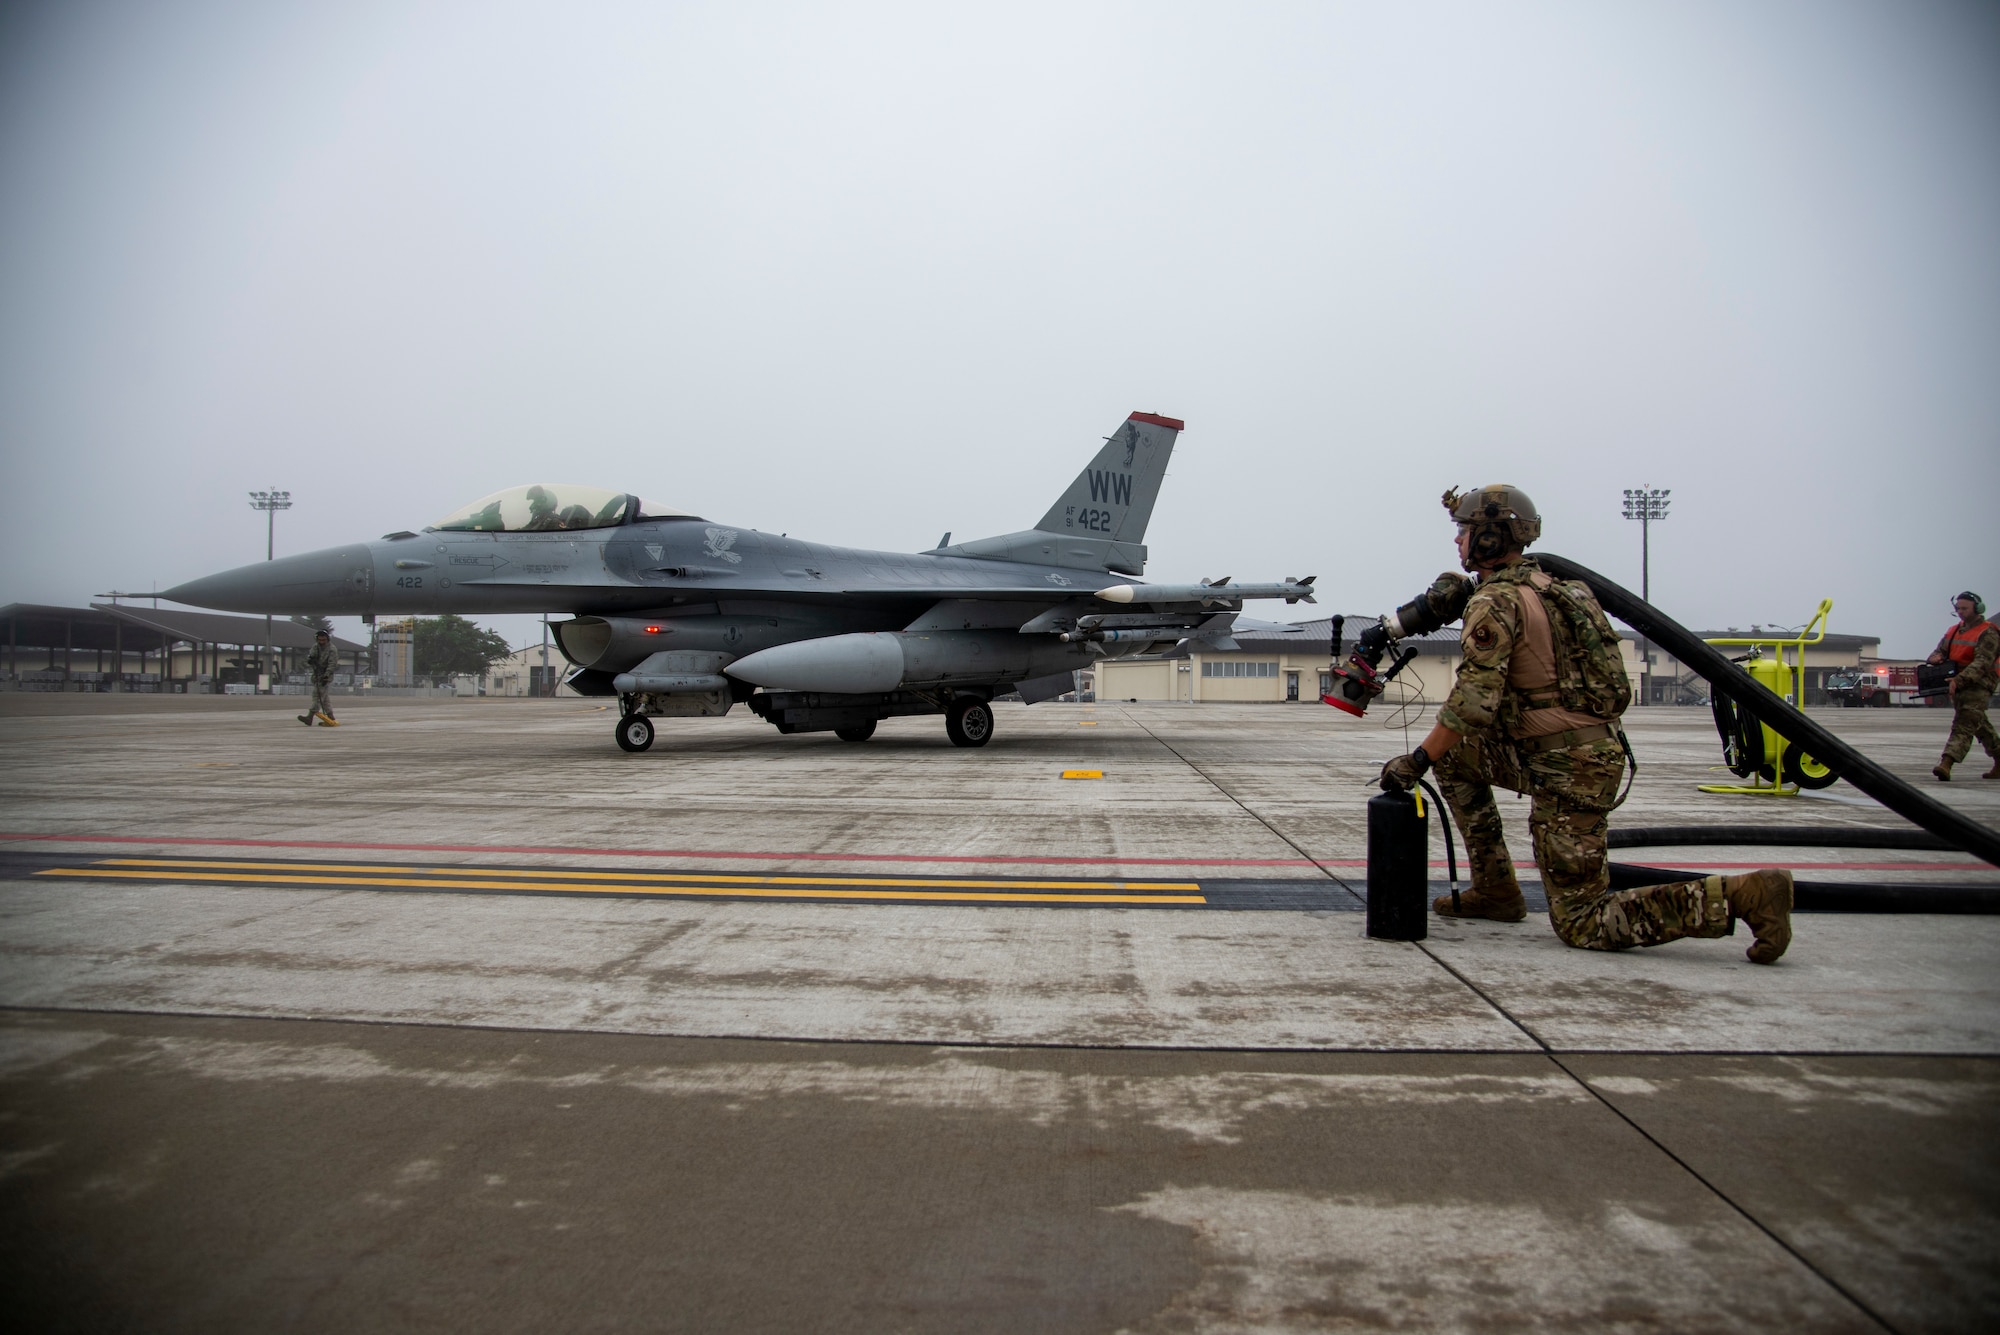 Misawa F-16 Fighting Falcon pilots, in collaboration with Kadena Air Base Airmen, executed a unique refueling capability for the first time at Misawa Air Base, Japan, June 25.